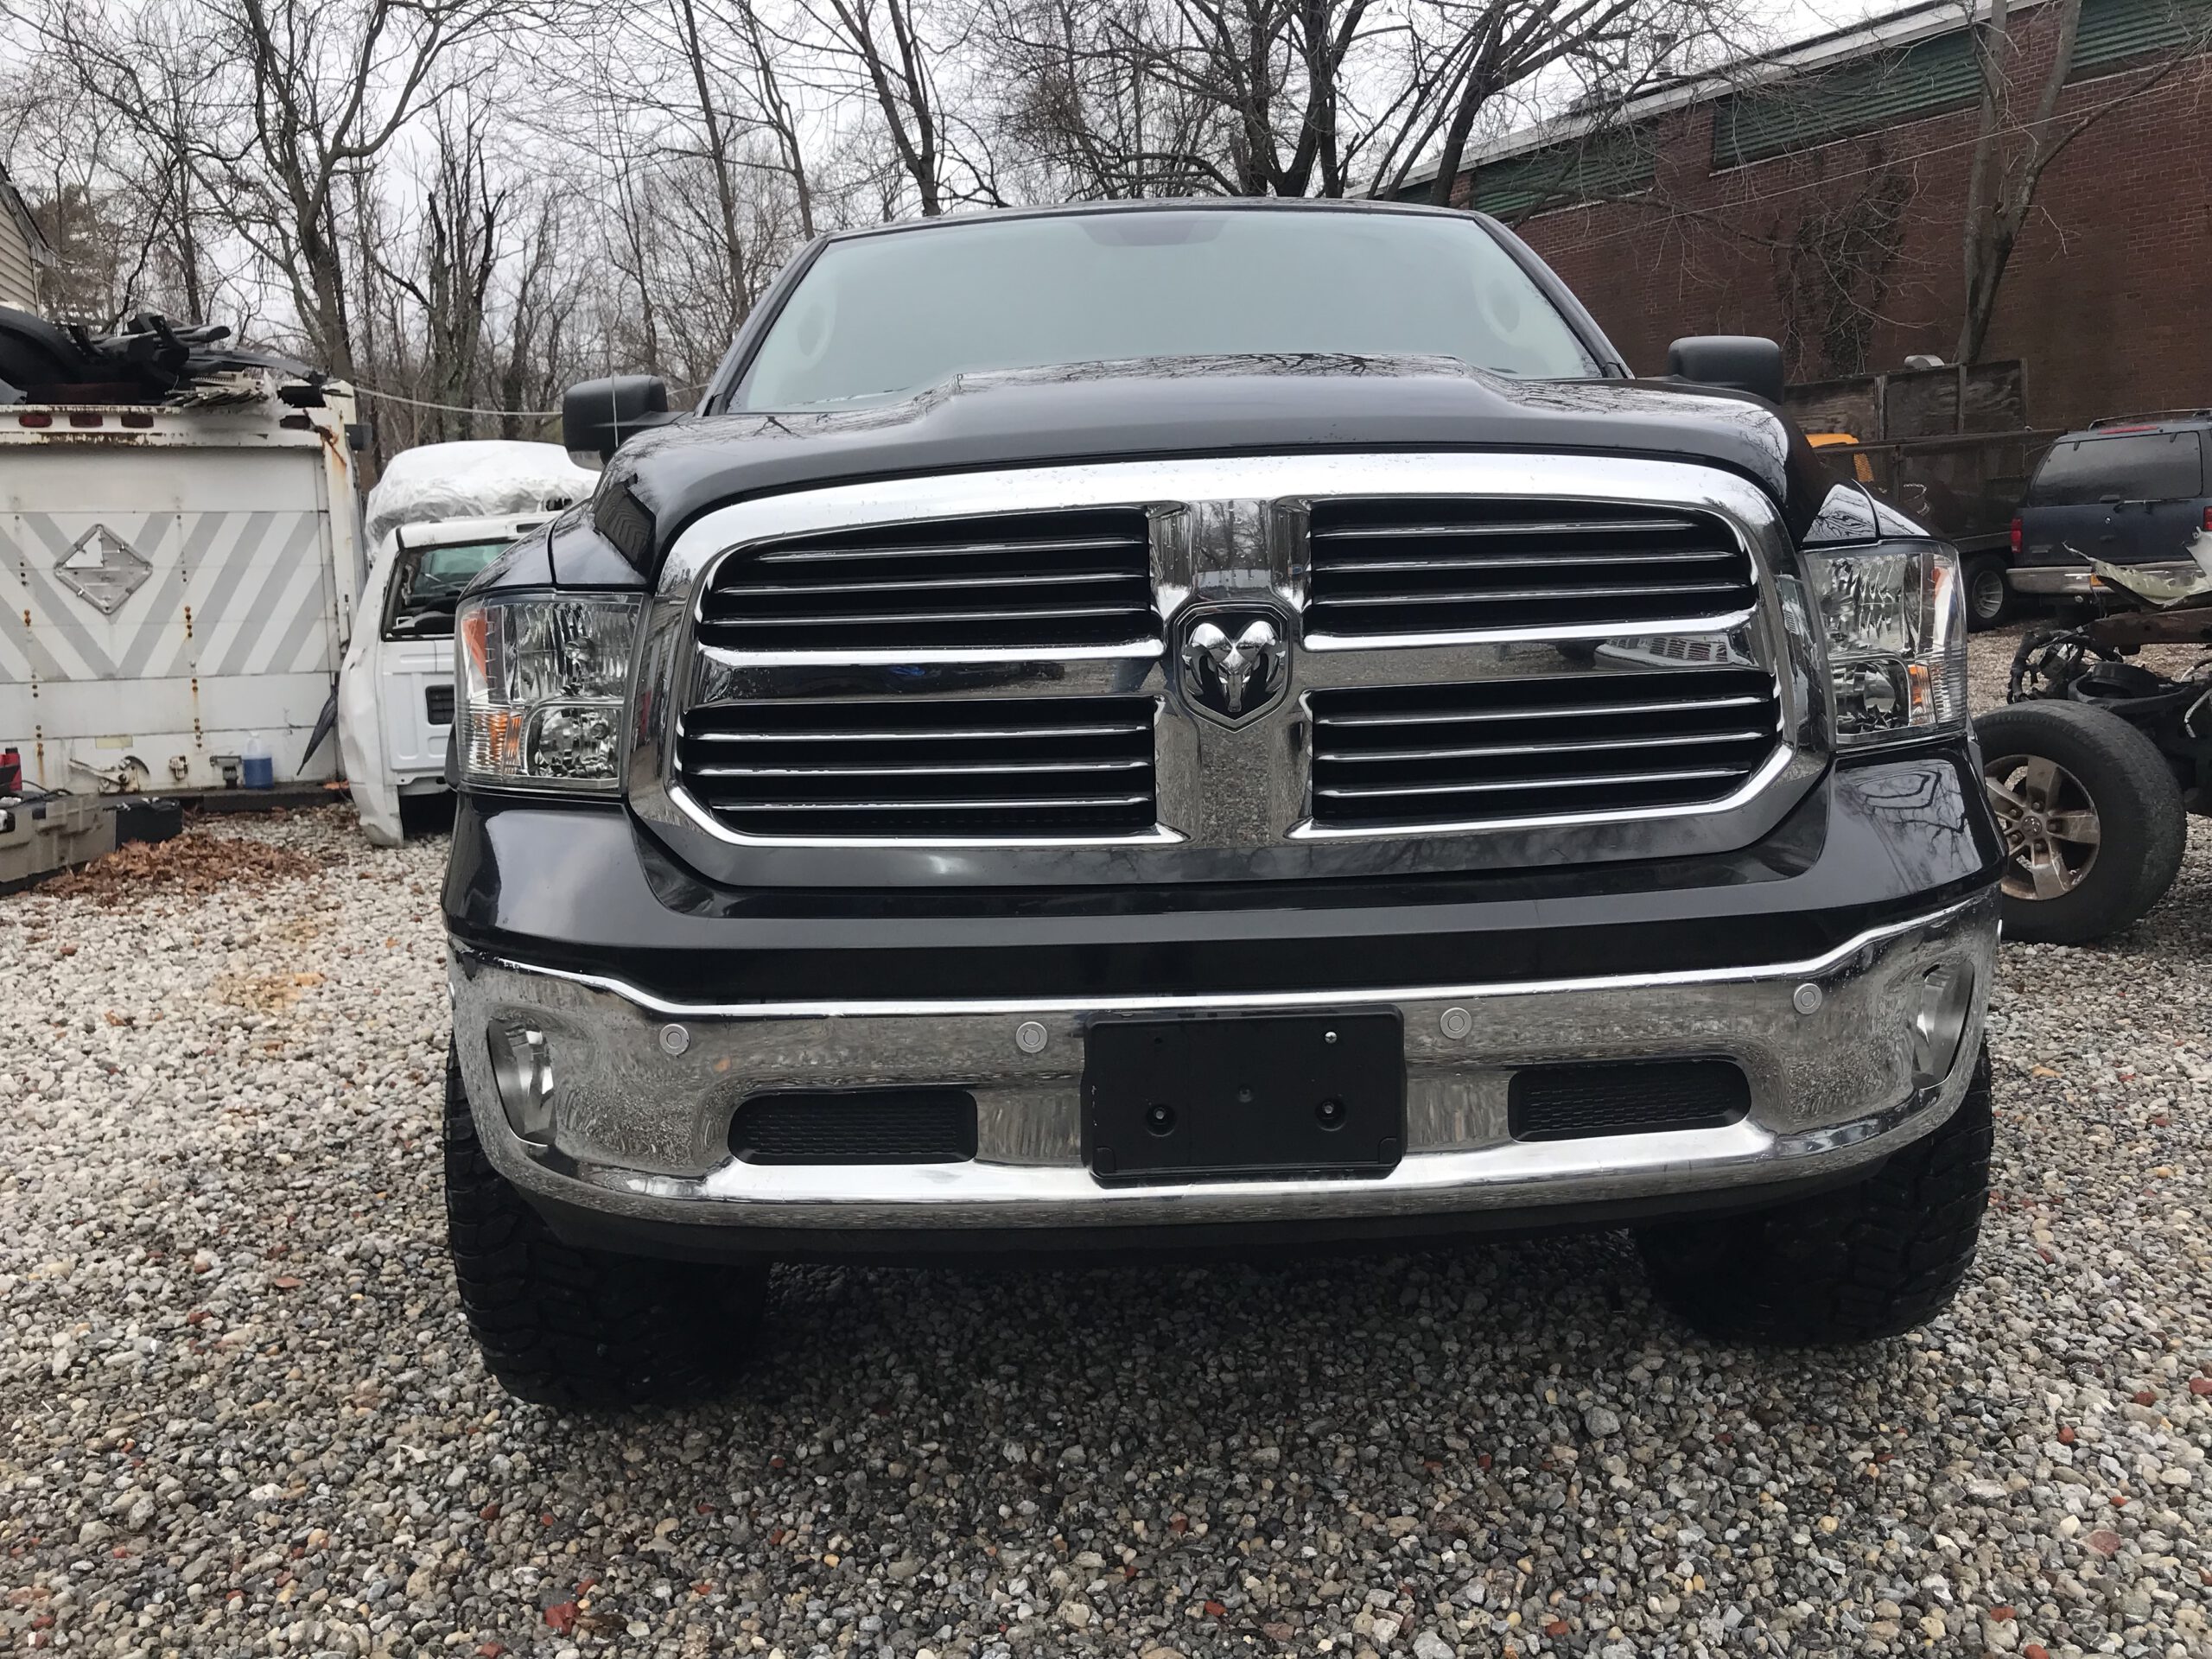 2019 Ram 1500 4 dr, Crew Cab, 4×4, Hemi, No body damage, lifted with 35″ tires and Fuel rims $29,999 full